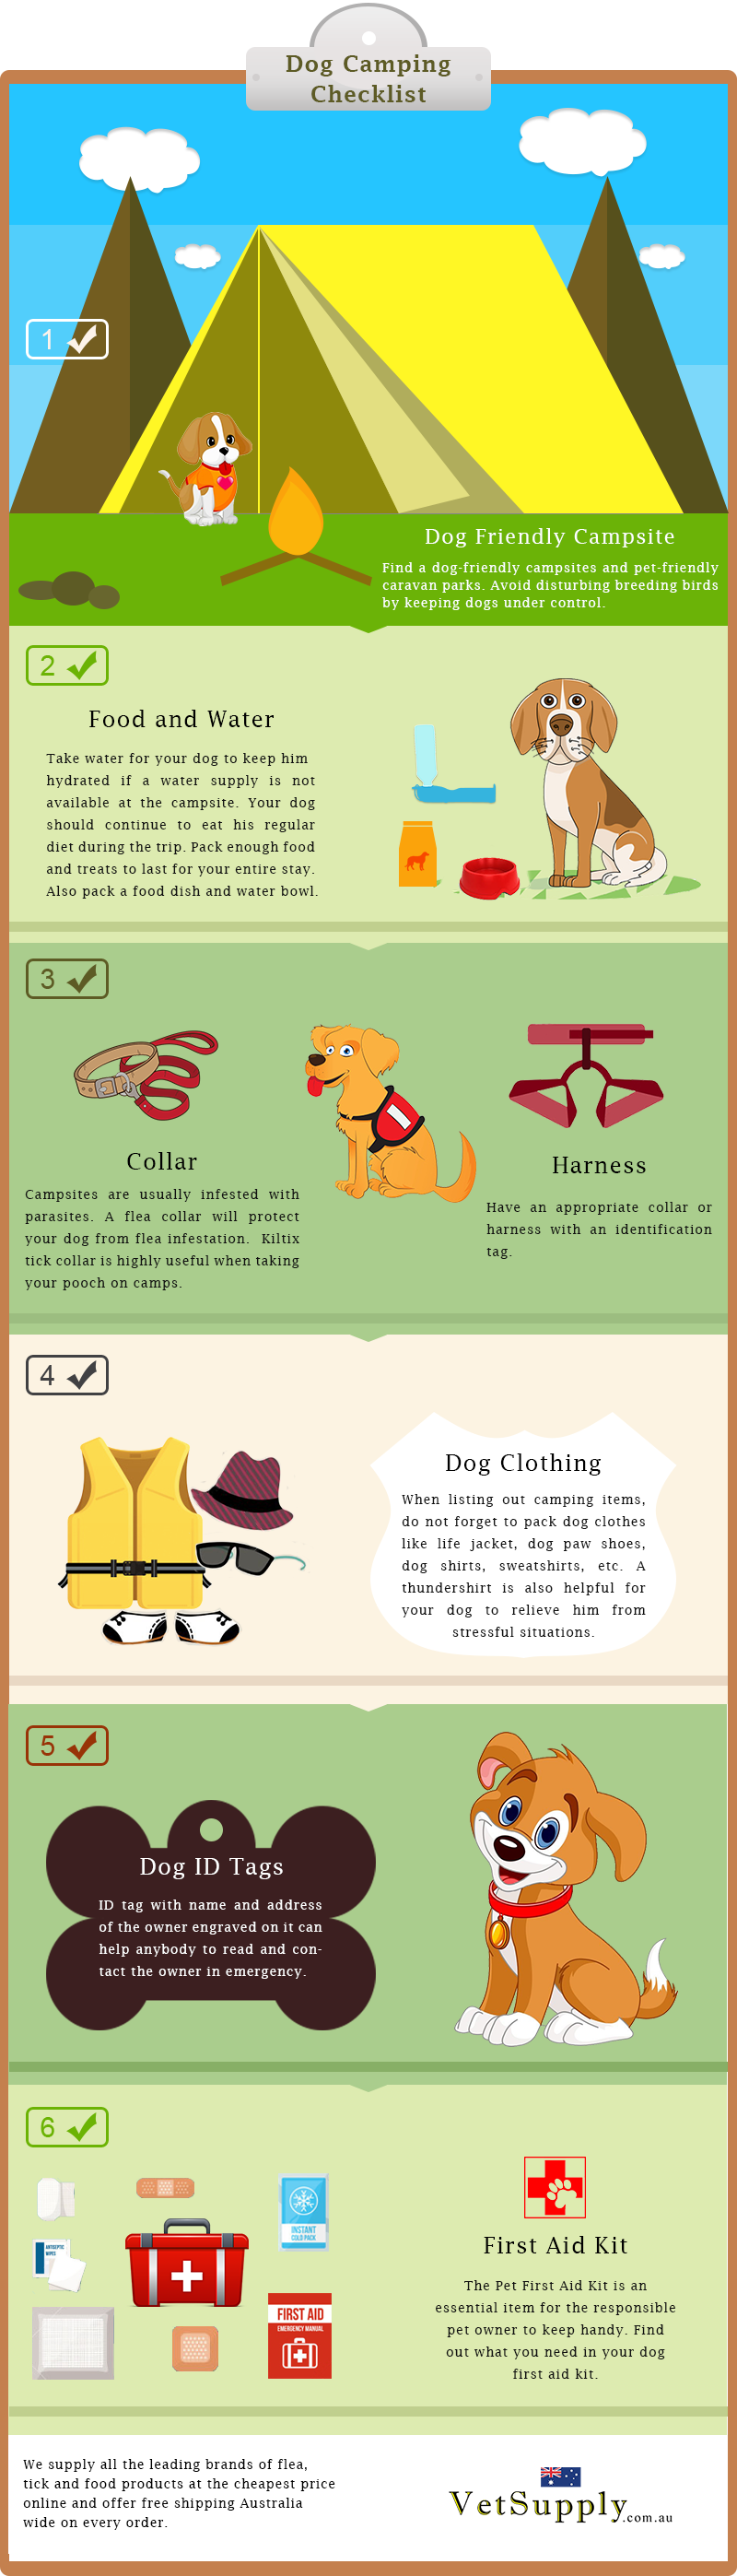 a-handy-checklist-for-having-a-carefree-dog-camping